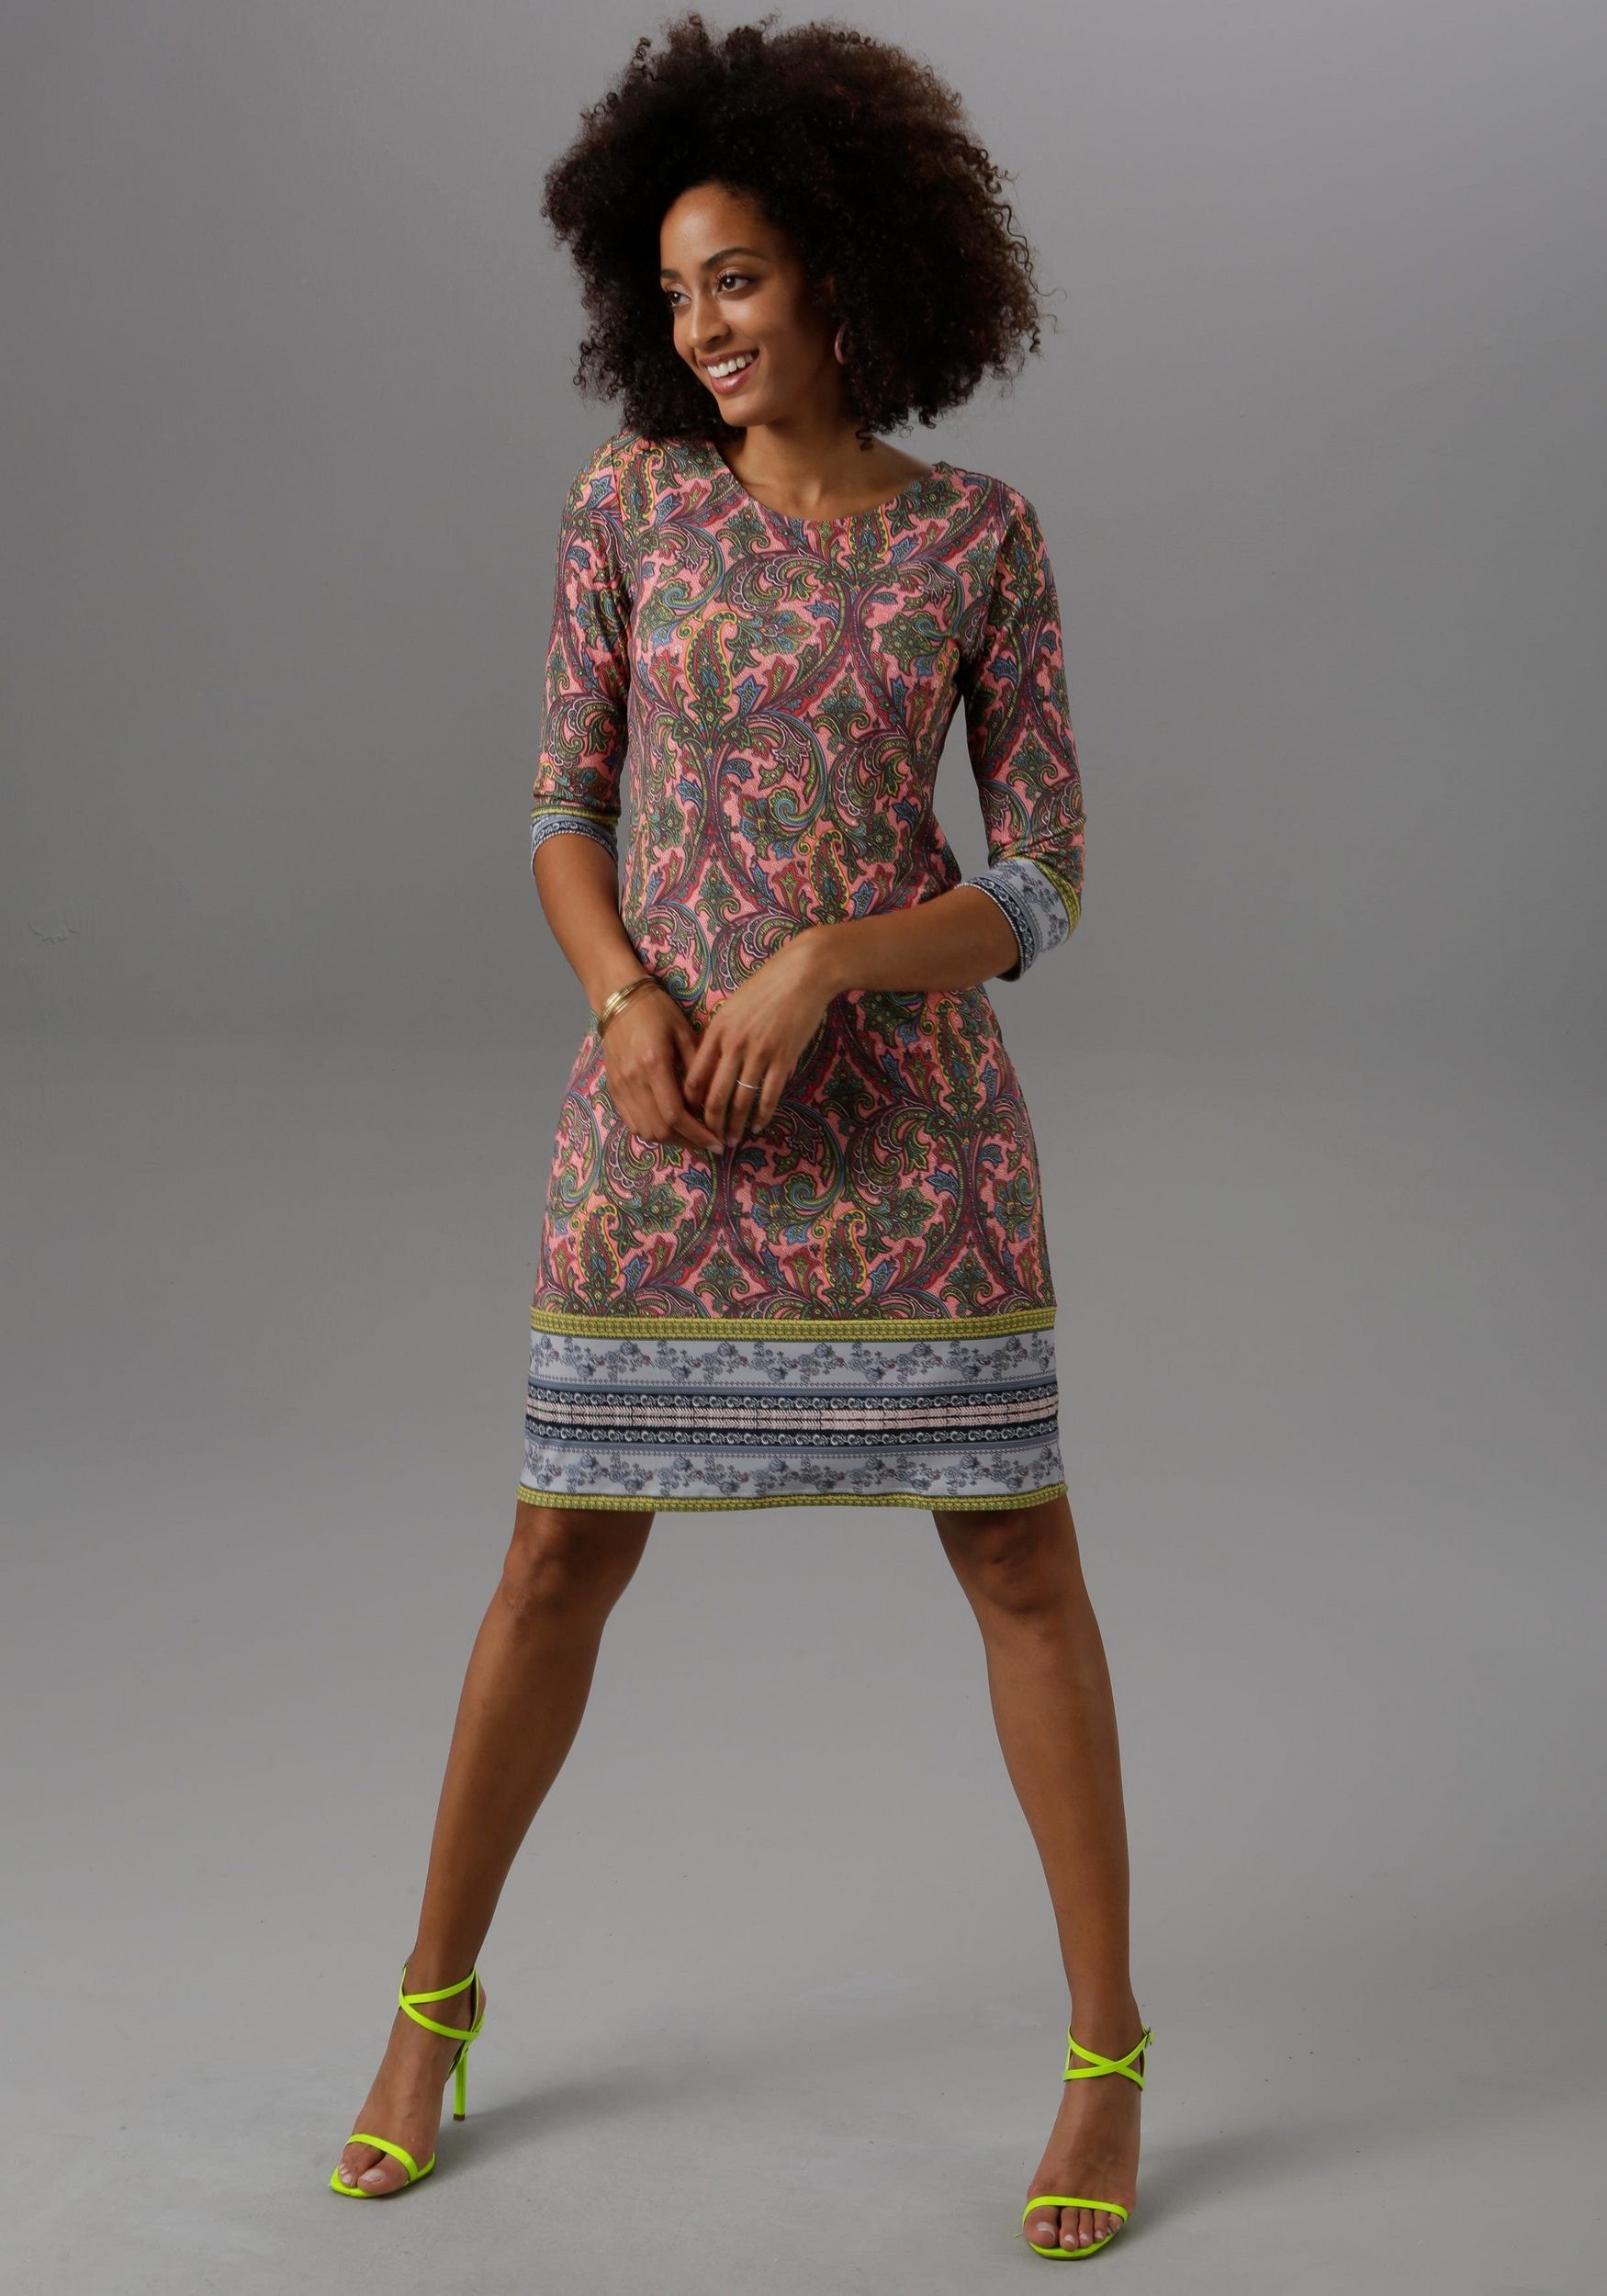 Aniston SELECTED Jerseykleid, mit farbenfrohem Muster